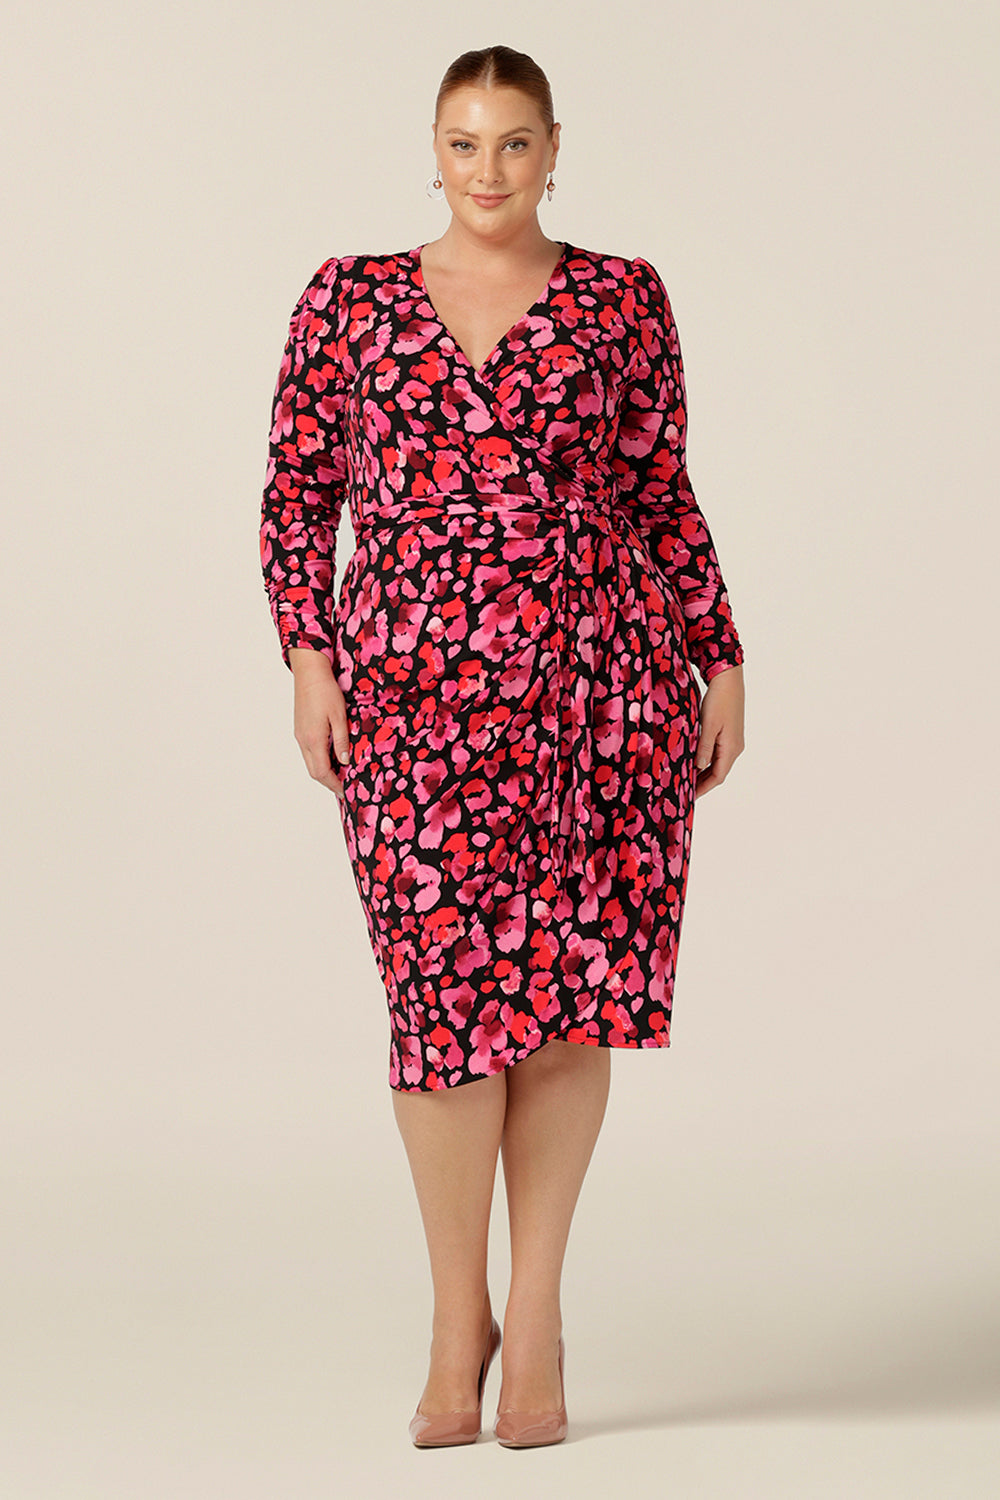 A fuller figure, size 18 woman wears a jersey wrap dress with long sleeves and a tulip skirt. Made in Australia and available to shop online in Australia and New Zealand, this wrap dress can be worn for workwear or as a going out dress for date night style. 